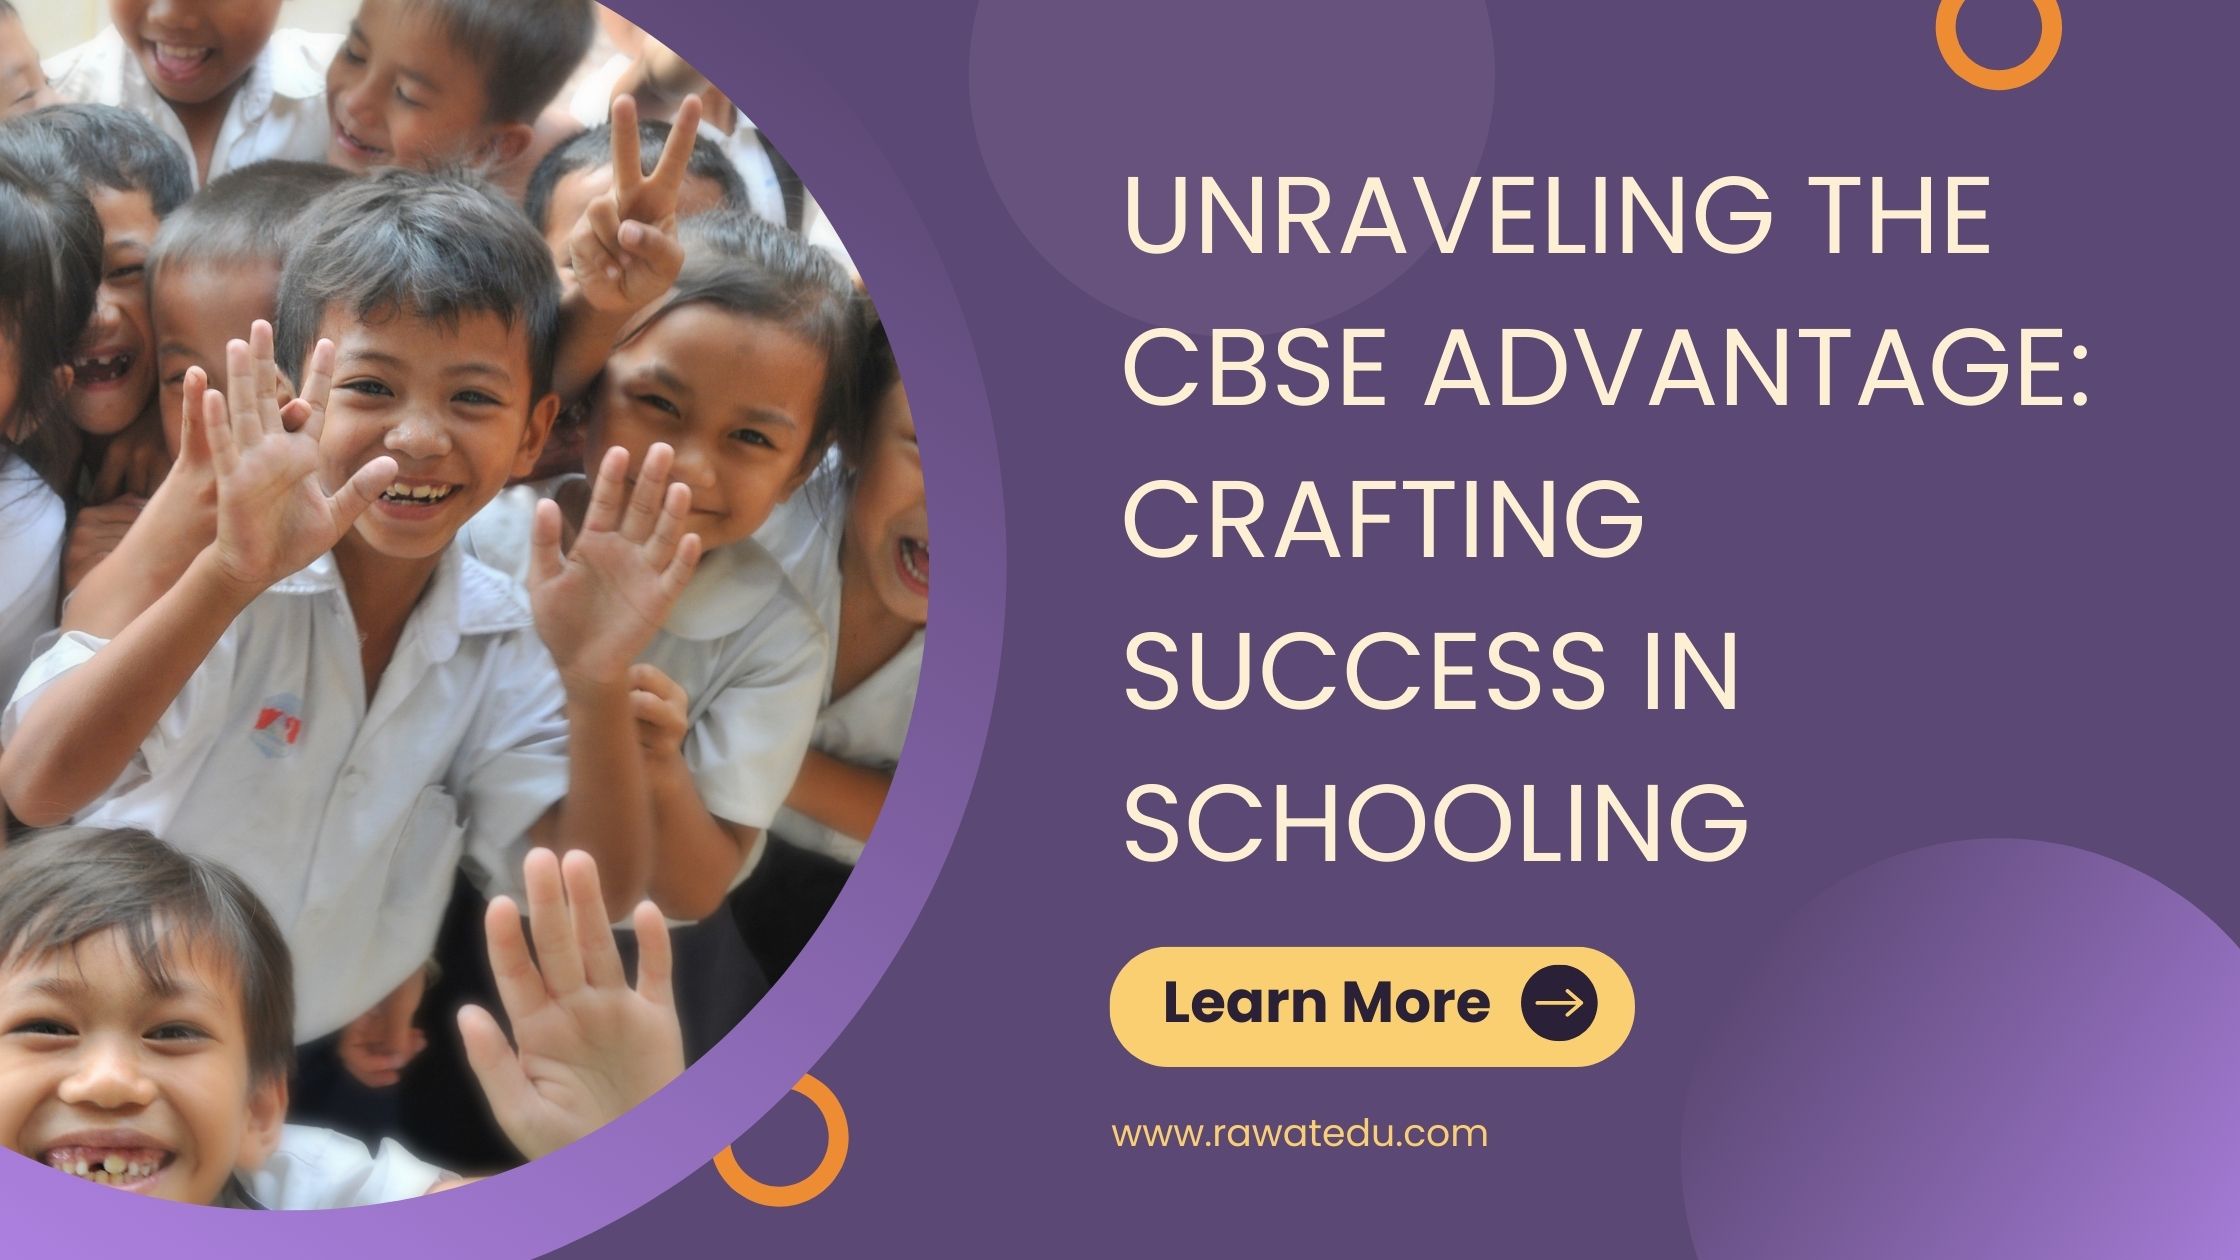 Unraveling the CBSE Advantage: Crafting Success in Schooling